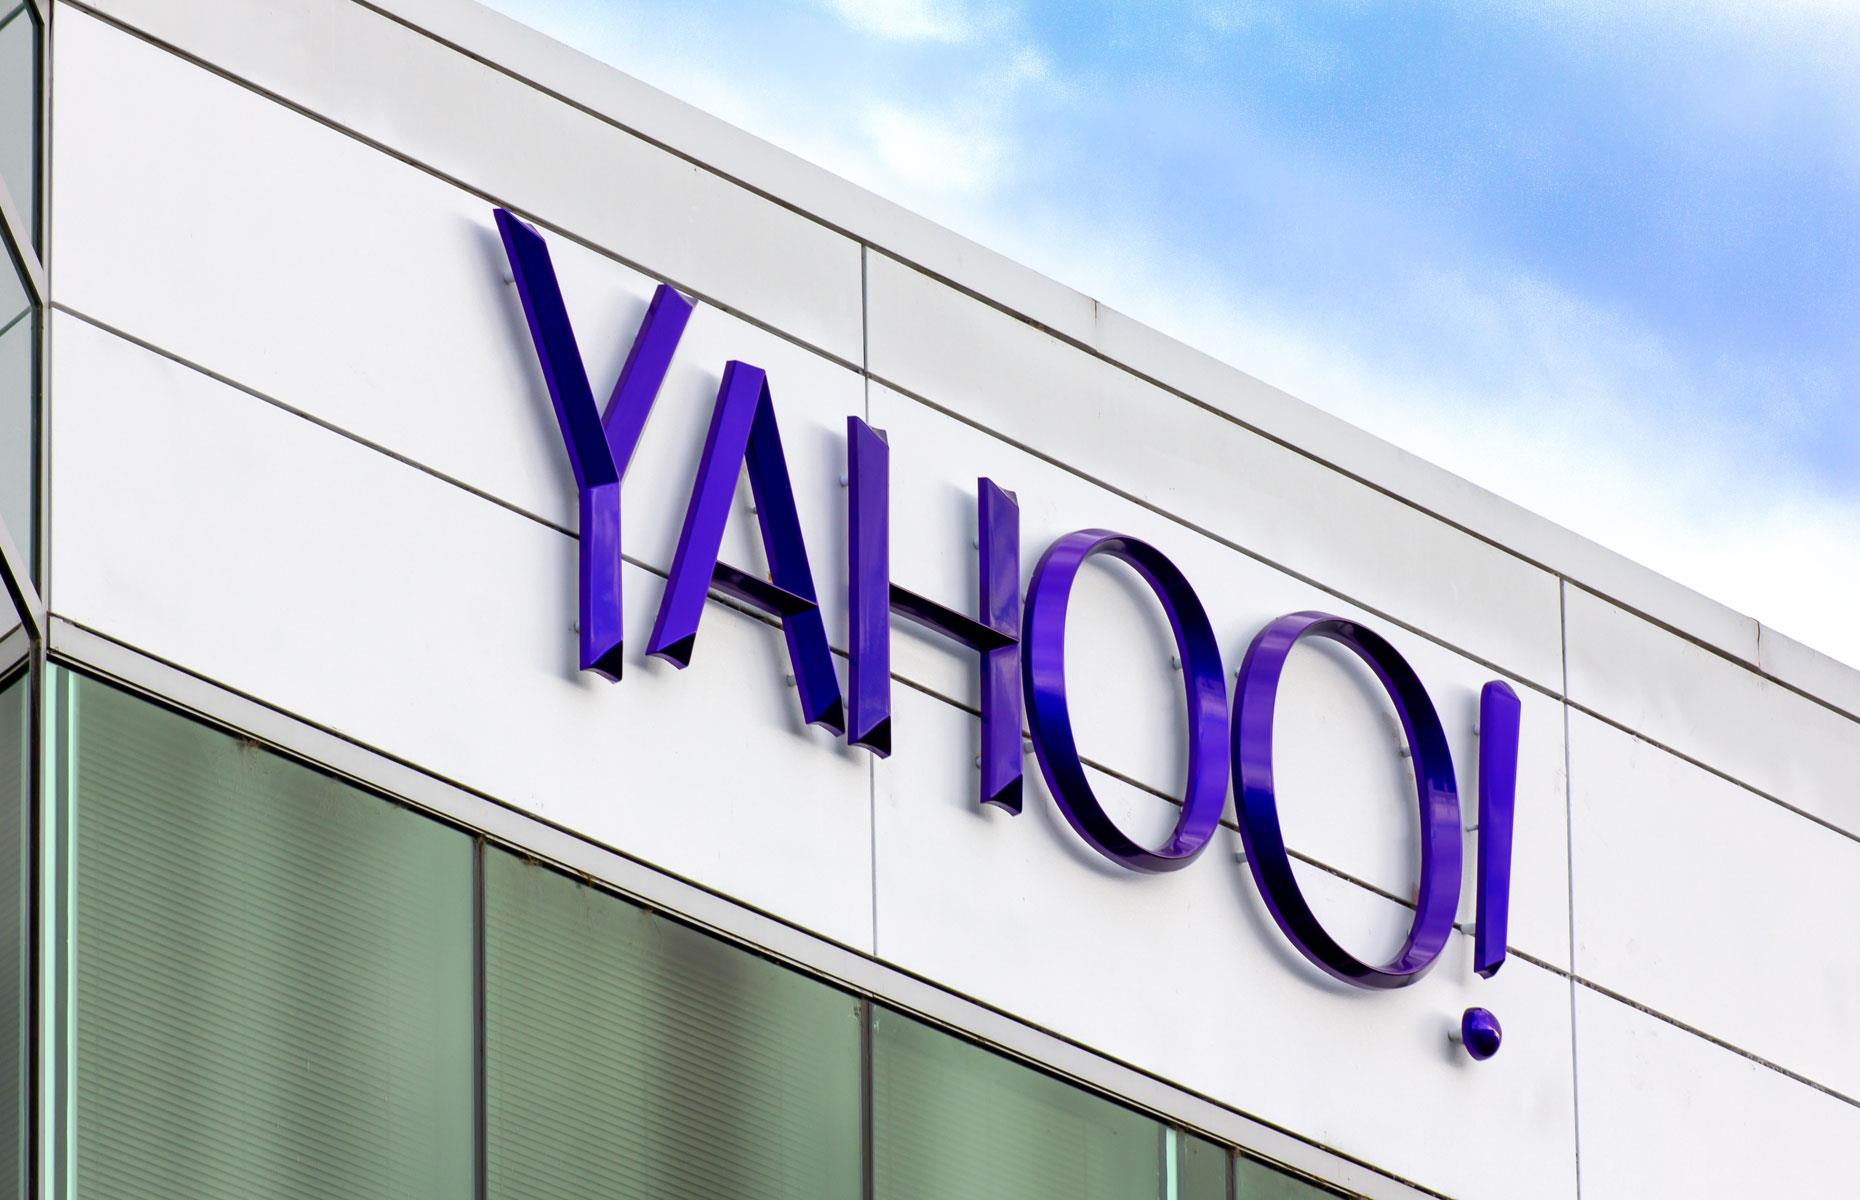 1996 – Yahoo: $1,000 invested then is worth $60,000 (£41k) today